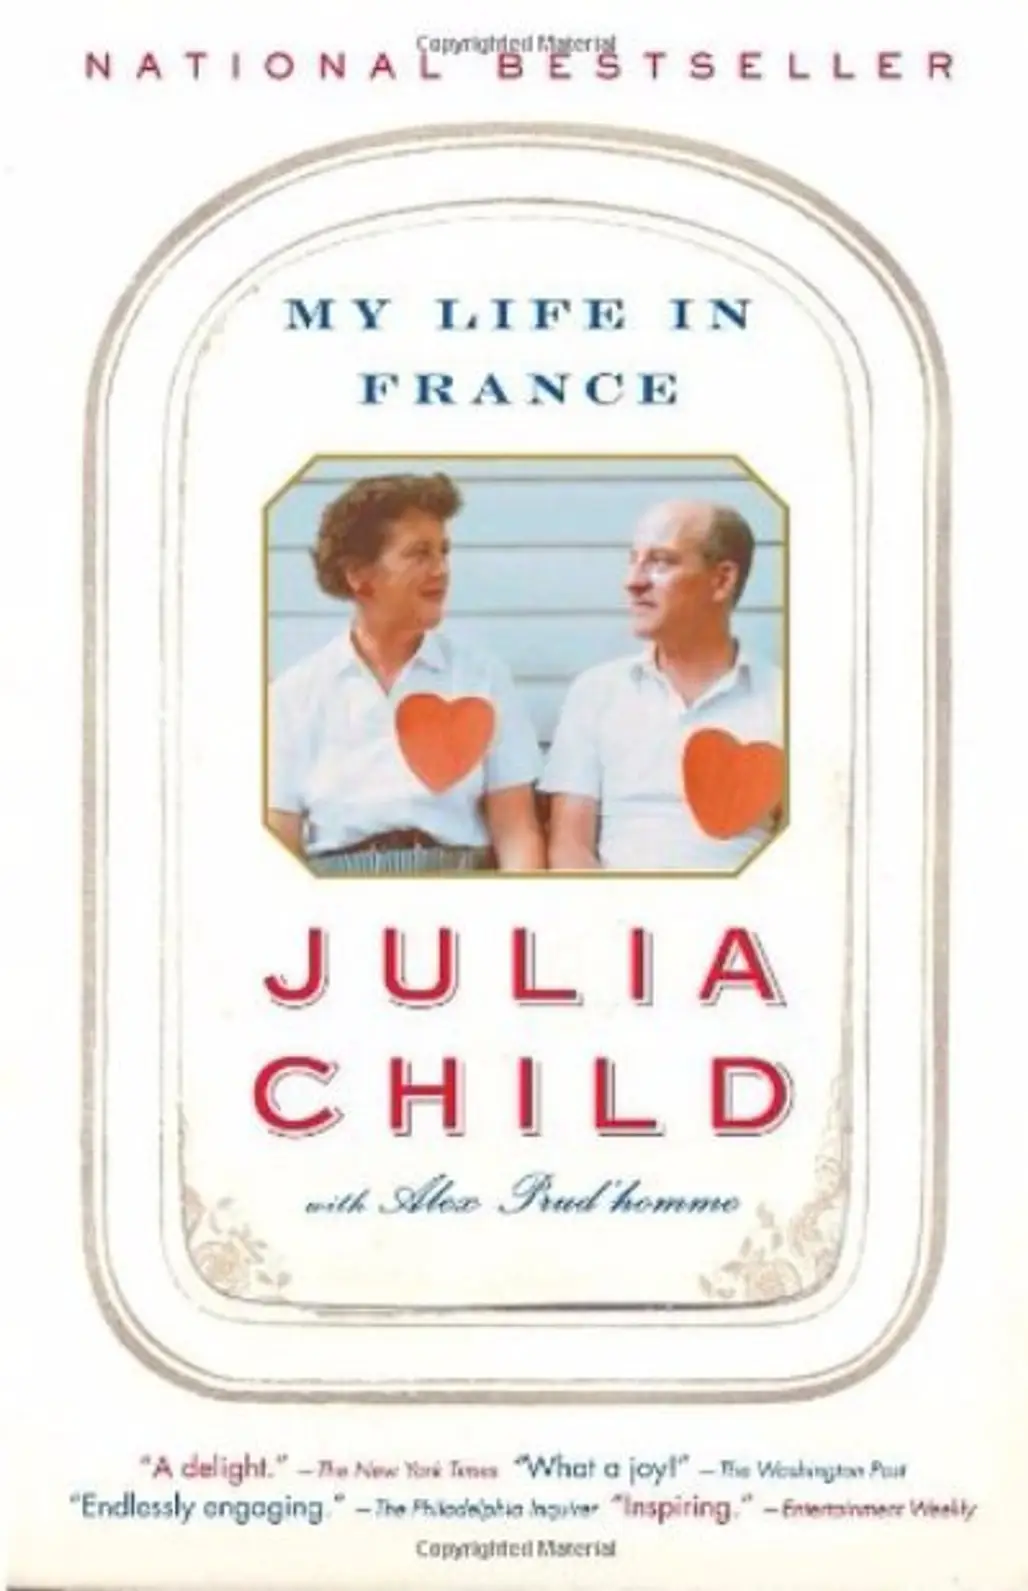 "My Life in France" by Julia Child